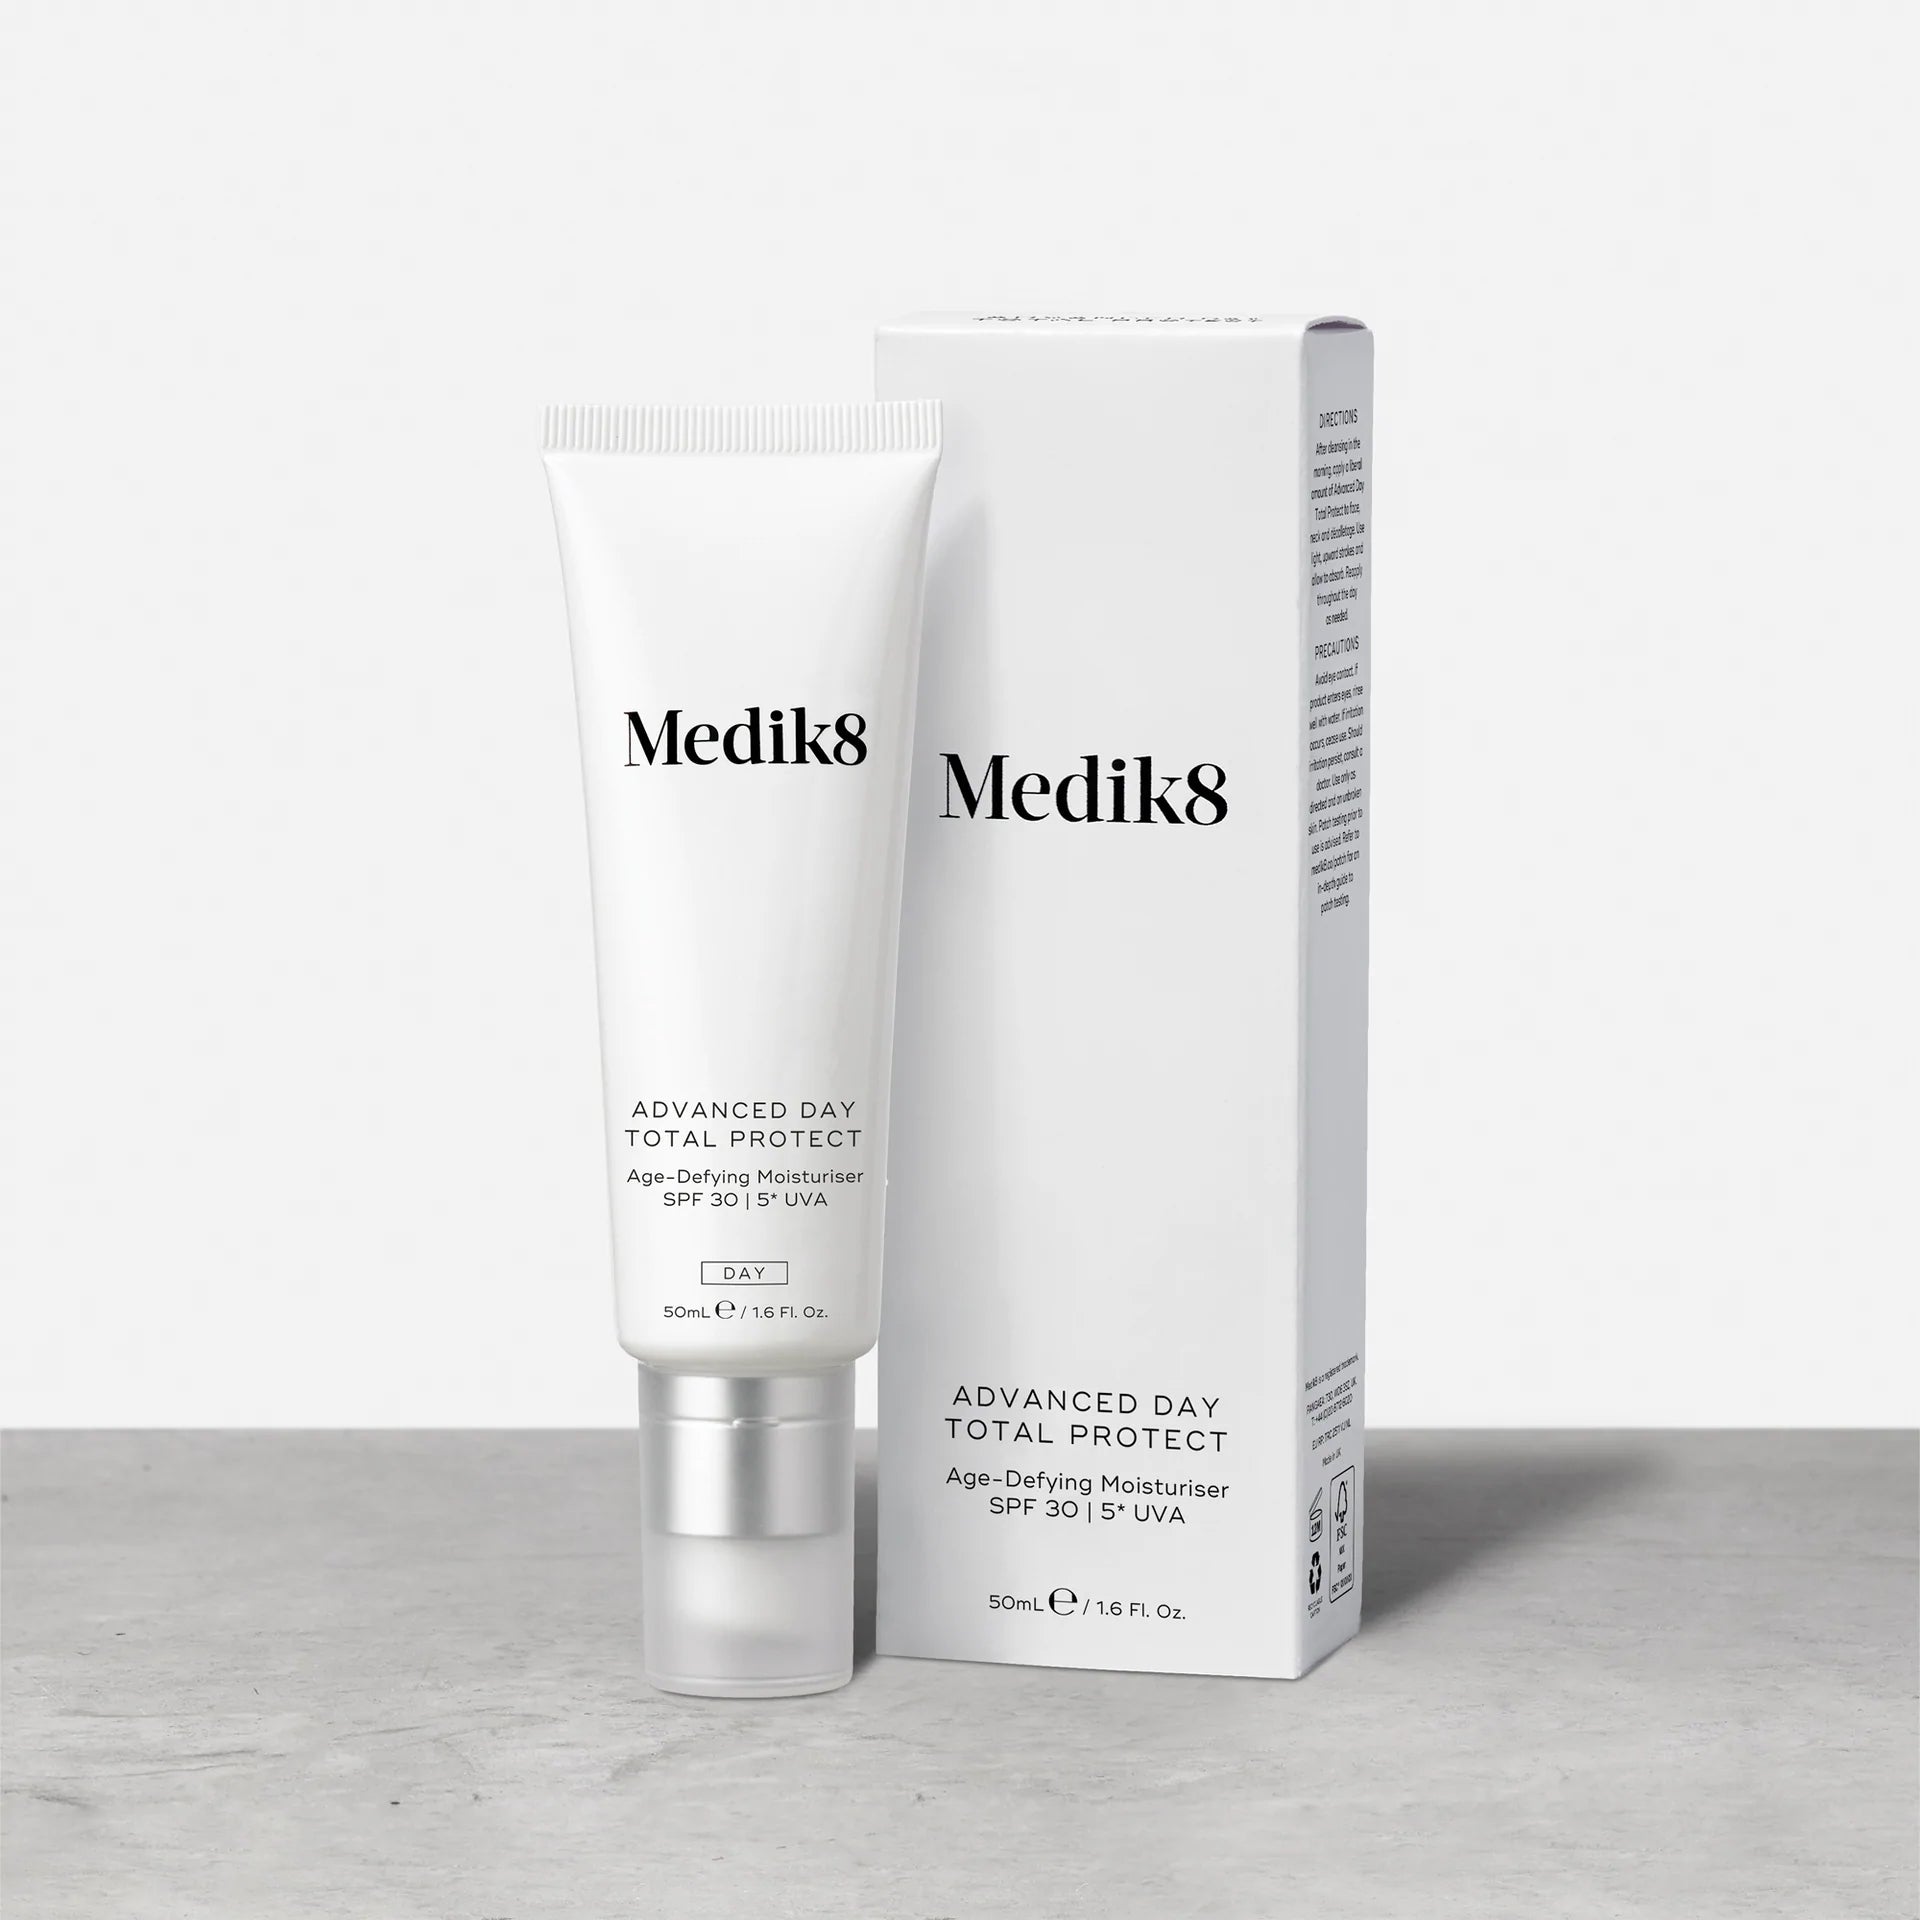 MEDIK8 ADVANCED DAY TOTAL PROTECT SPF30 - Exquisite Laser Clinic